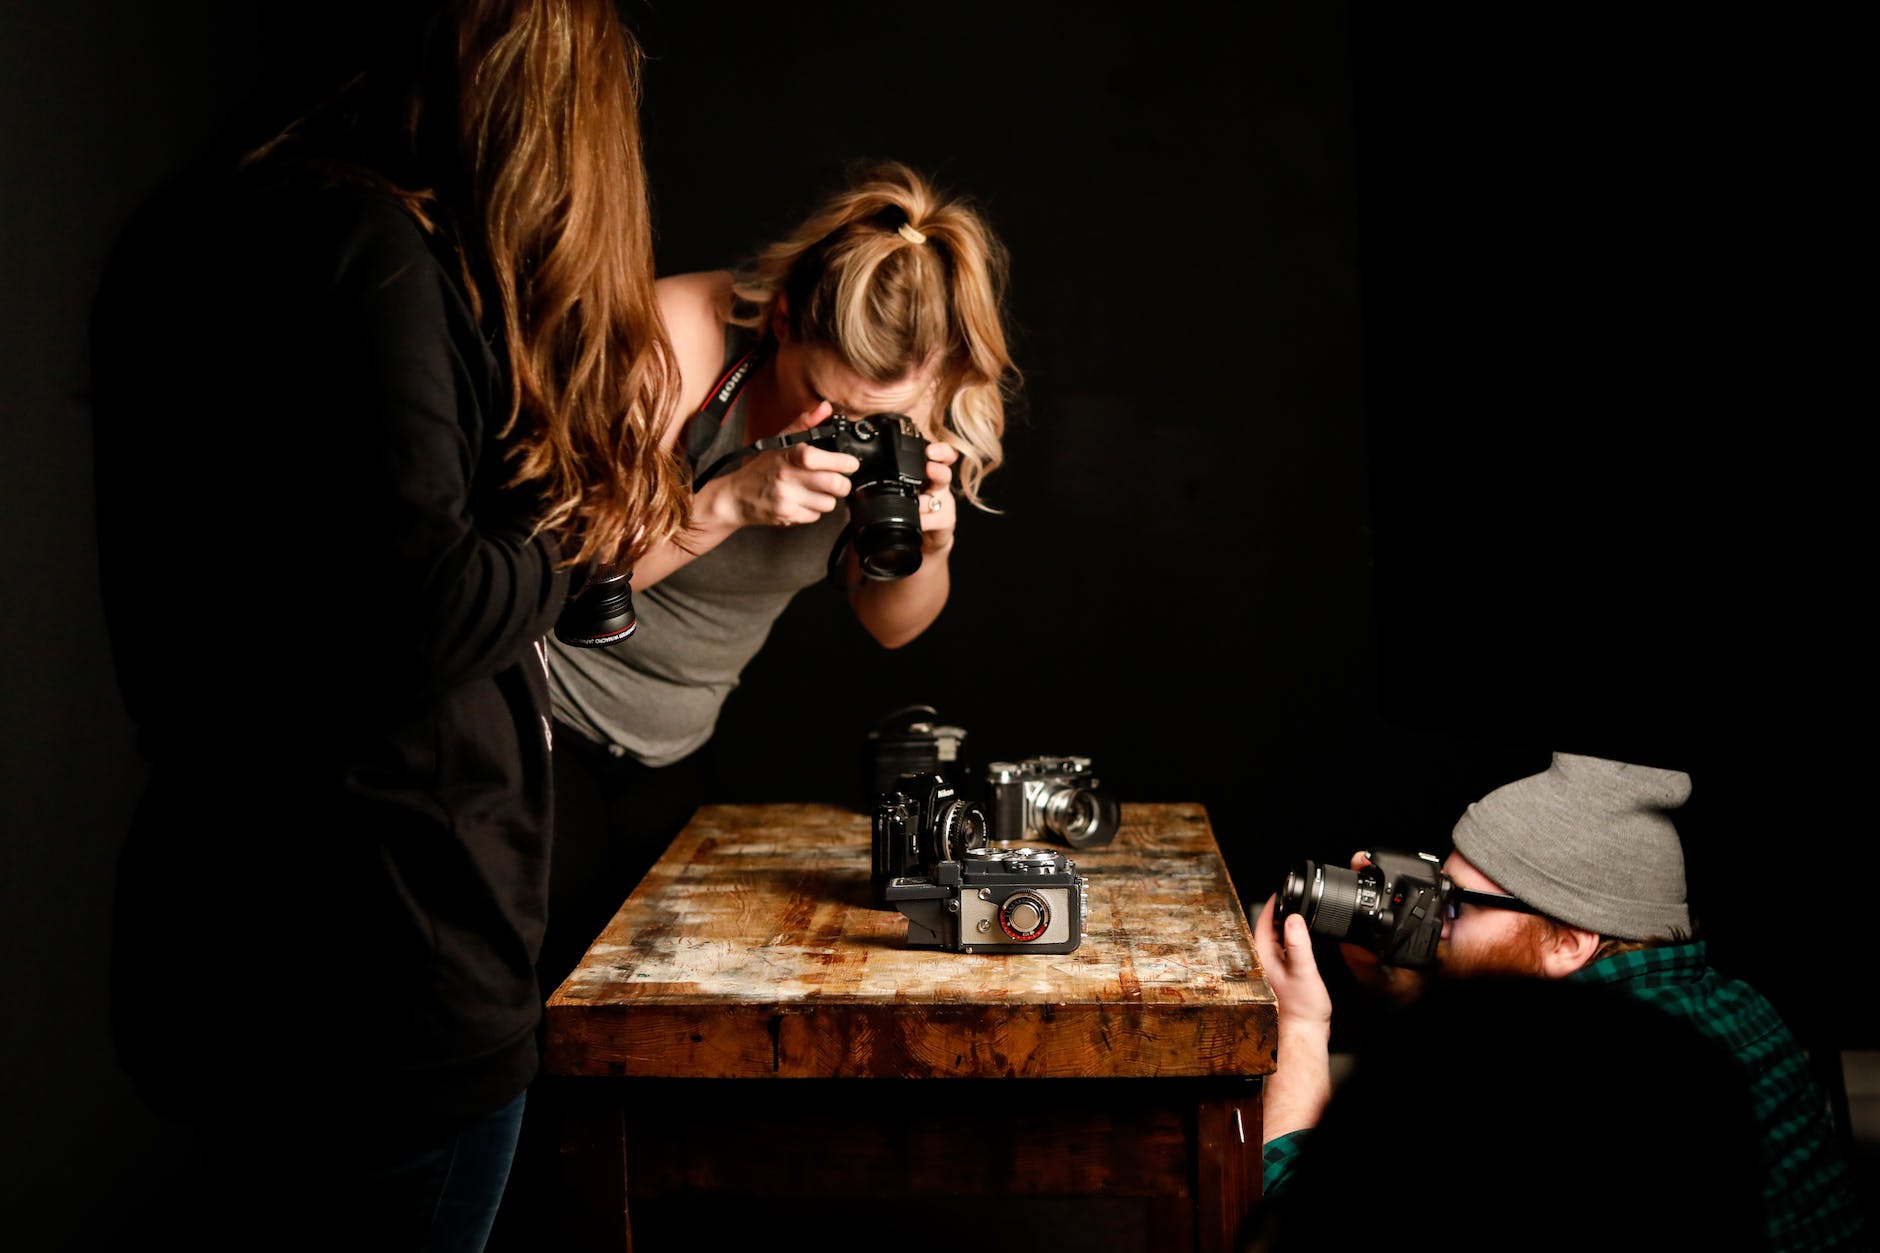 three photographers stood in a dark room taking photos of old camera on a wooden table